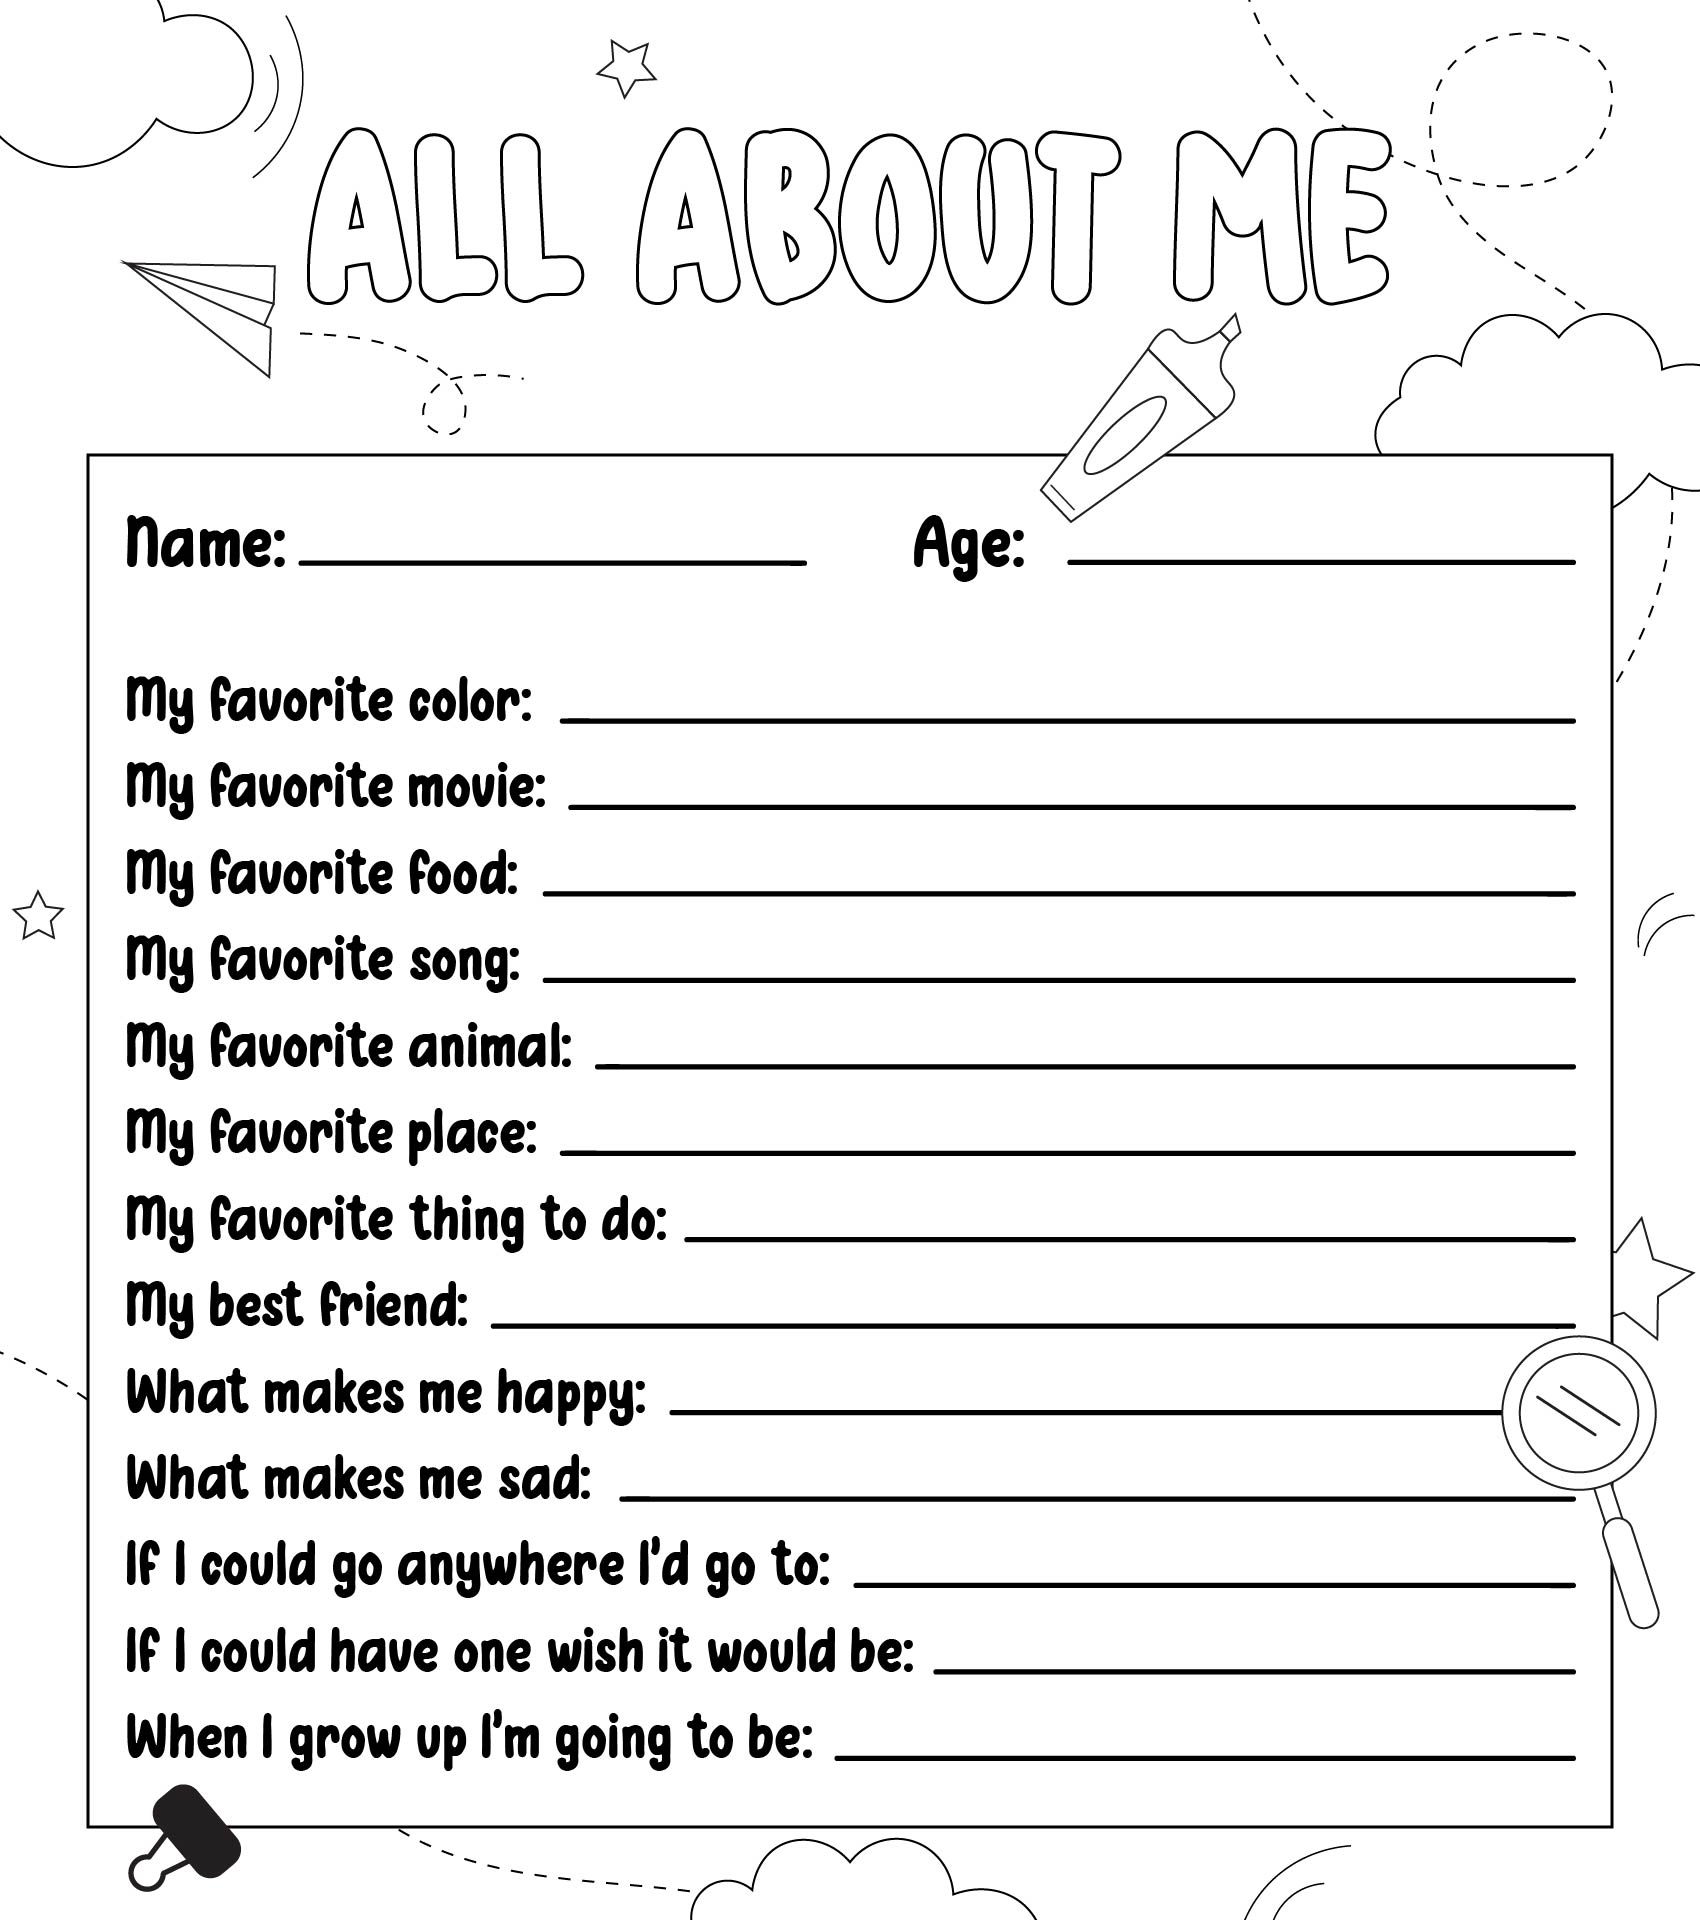 All About Me Q&A Printable Interview Sheet